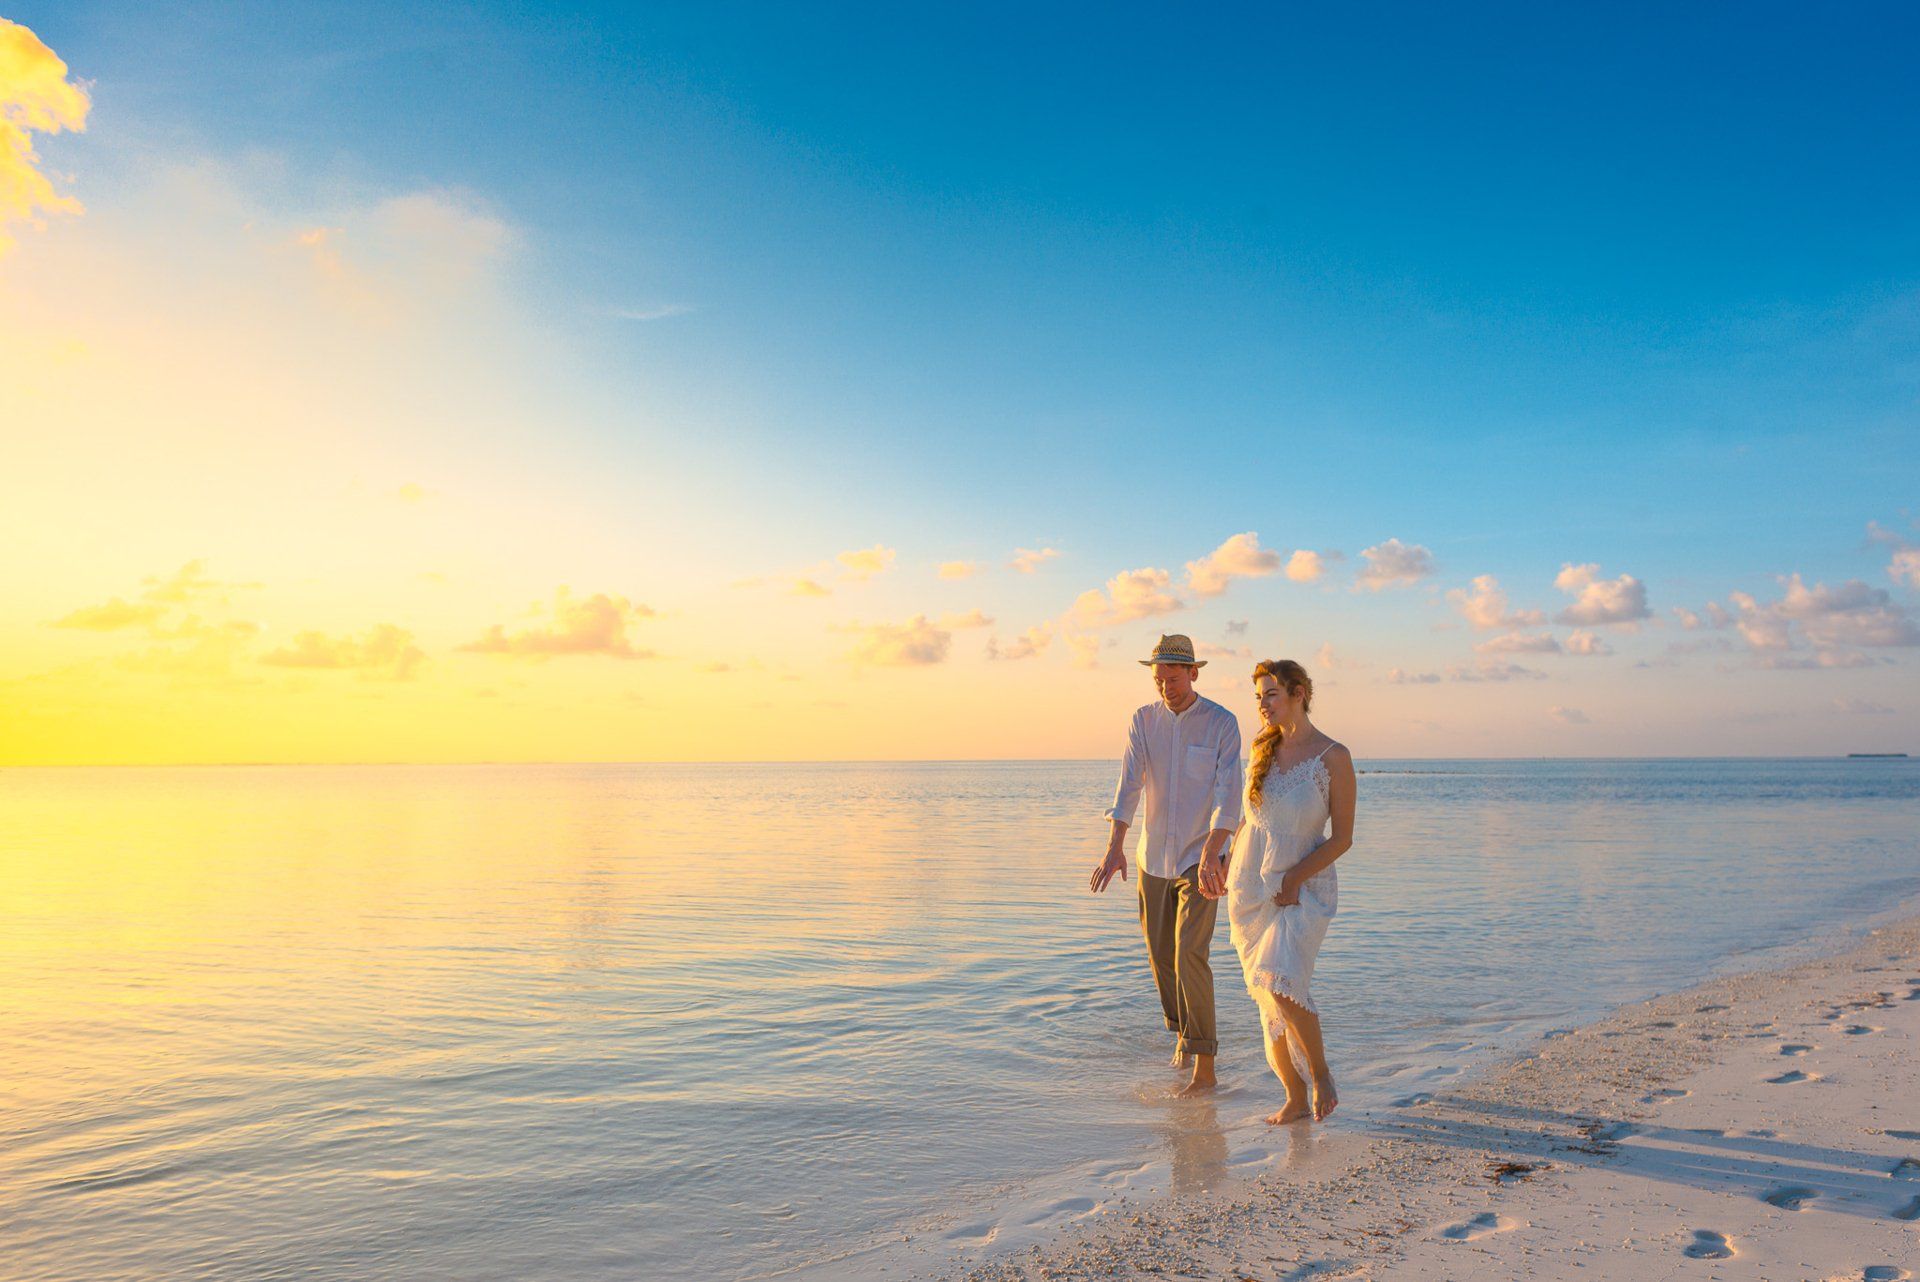 A man and a woman are walking on the beach at sunset.